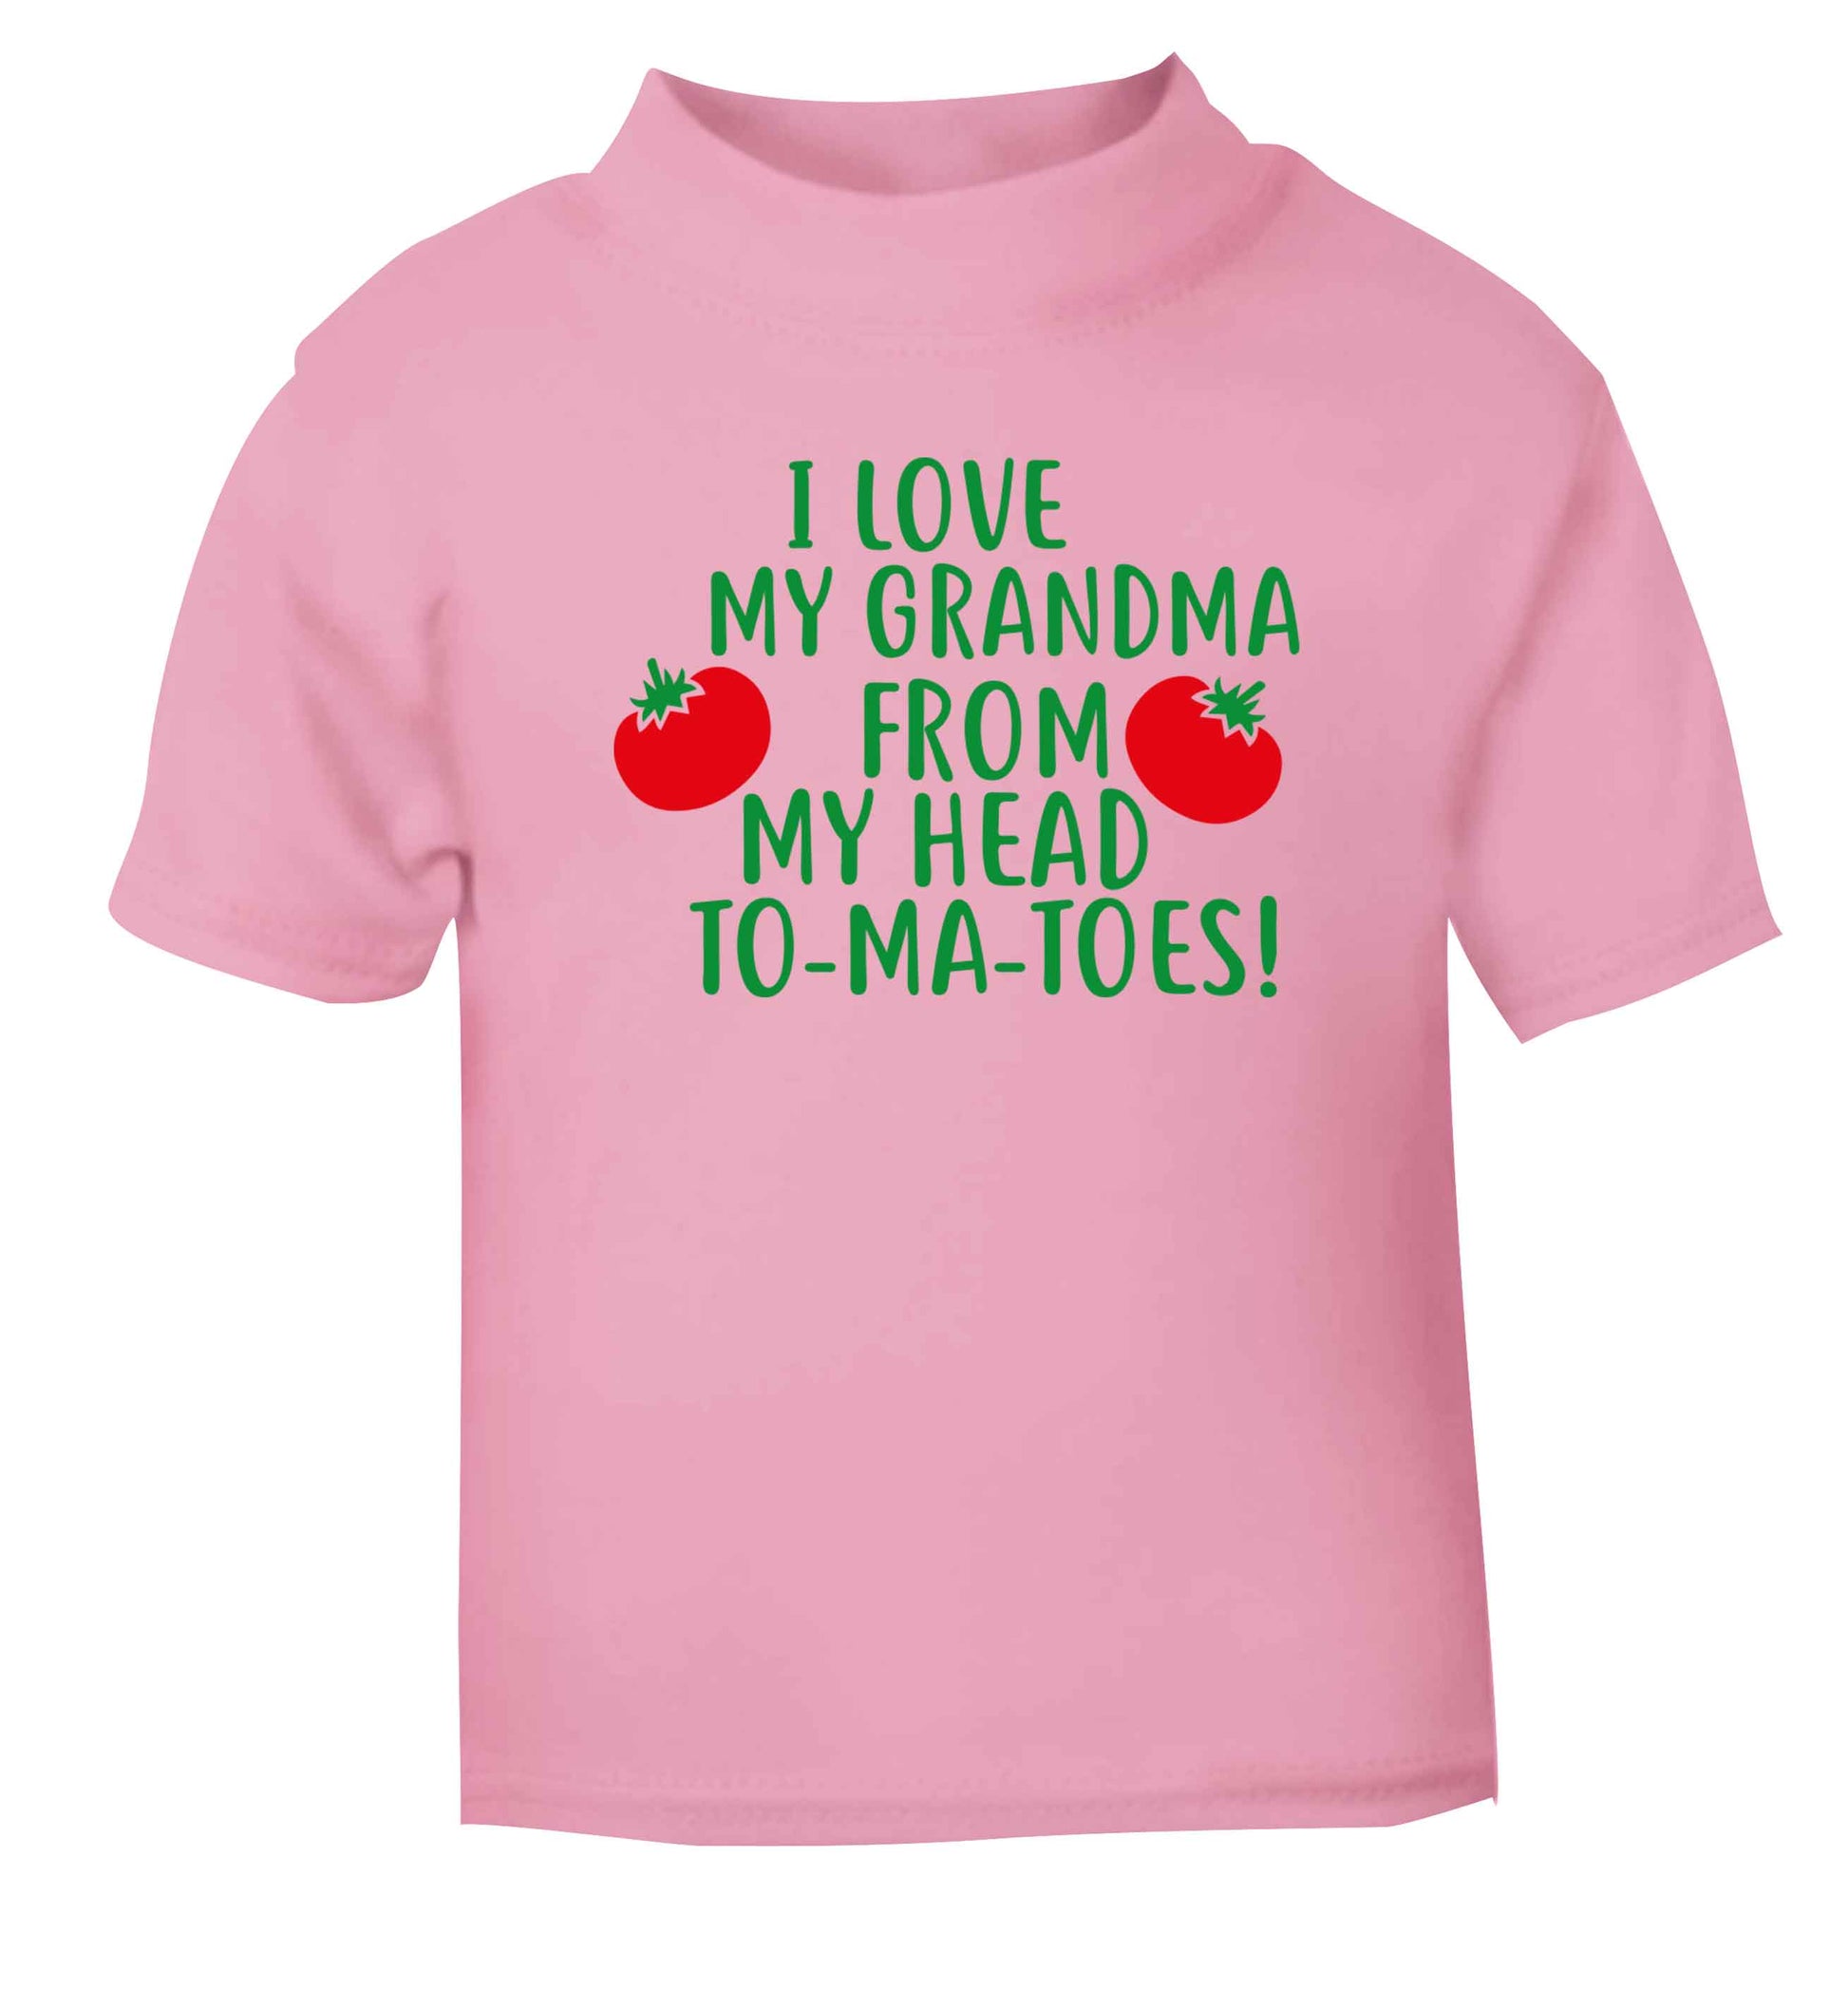 I love my grandma from my head to-ma-toes light pink Baby Toddler Tshirt 2 Years